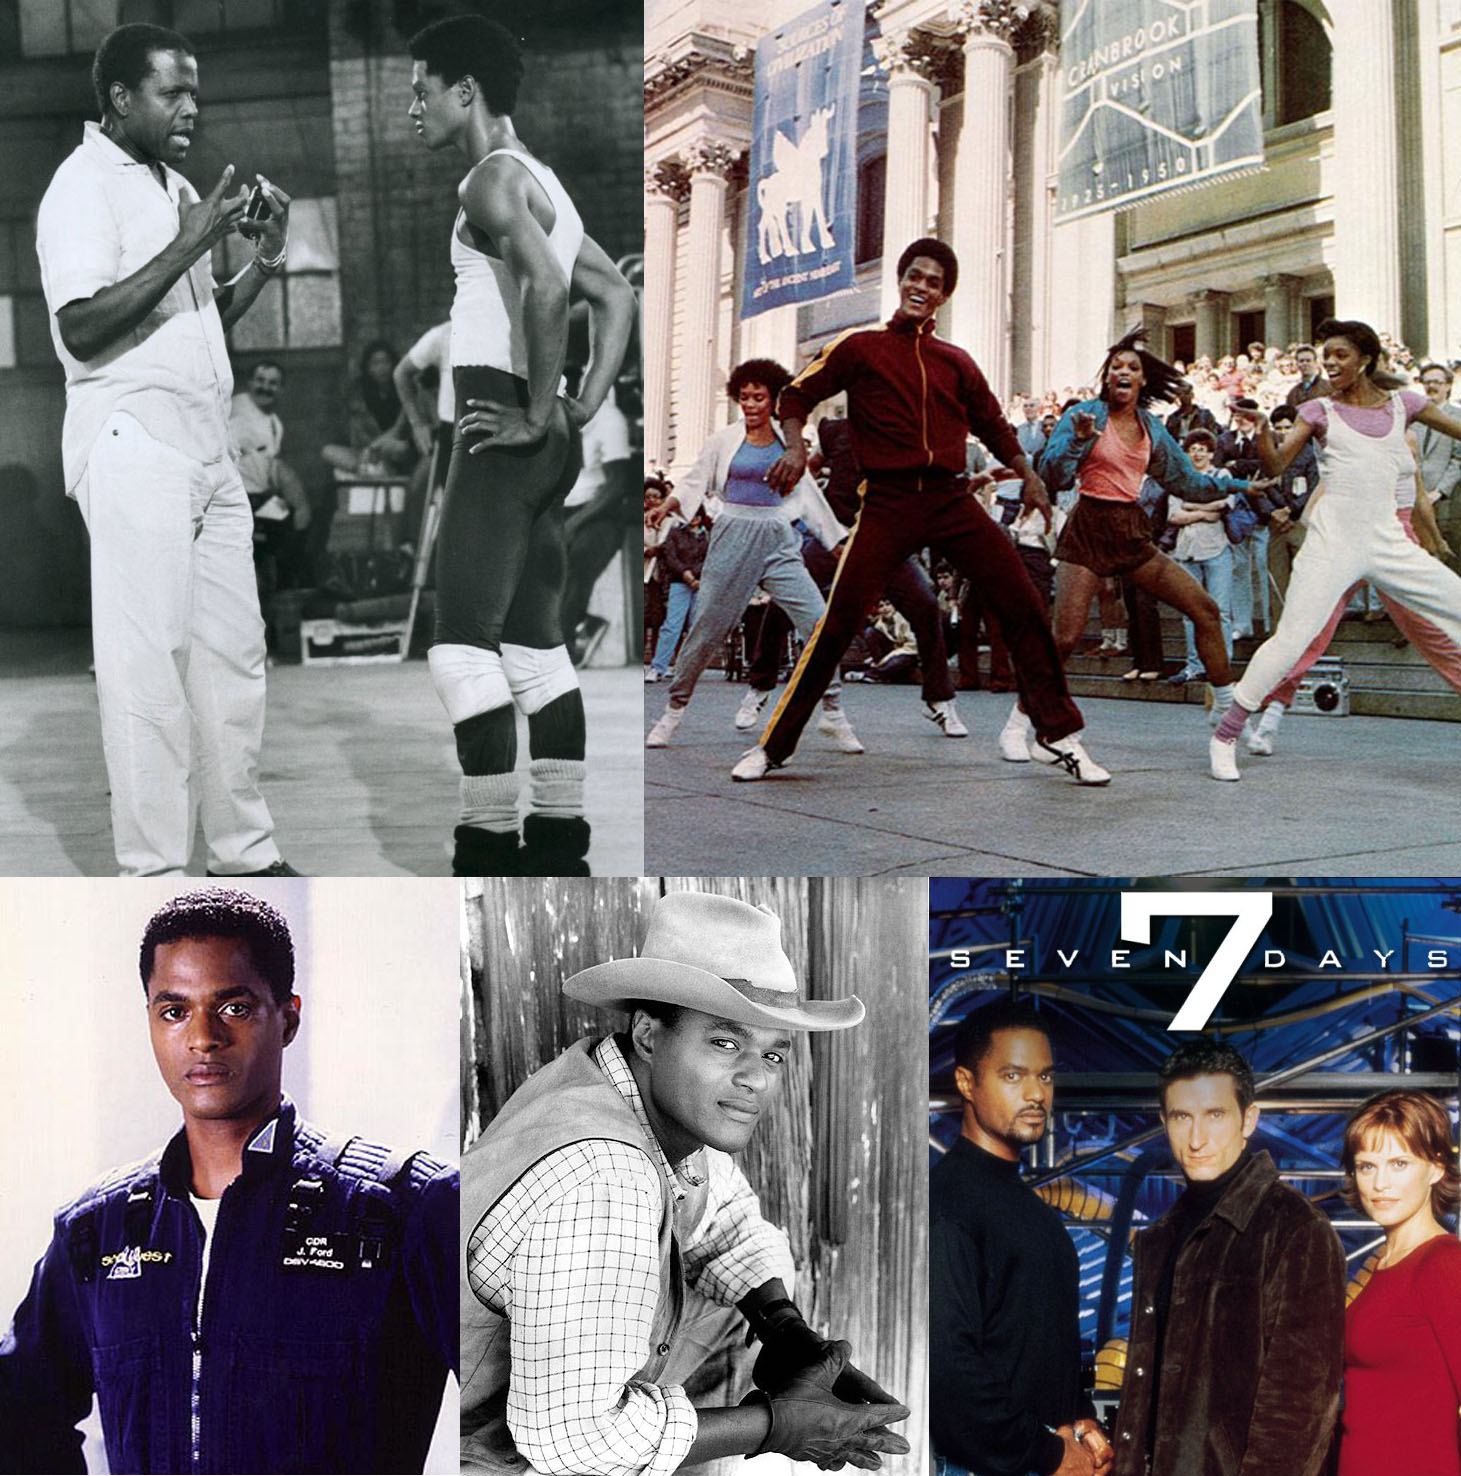 Clockwise from top left: Sidney Poitier directing Don Franklin in "Fast Forward", Don Franklin (Center) "Fast Forward", Don Frankiln (L) "Seven Days", "Young Riders", "seaQuest"